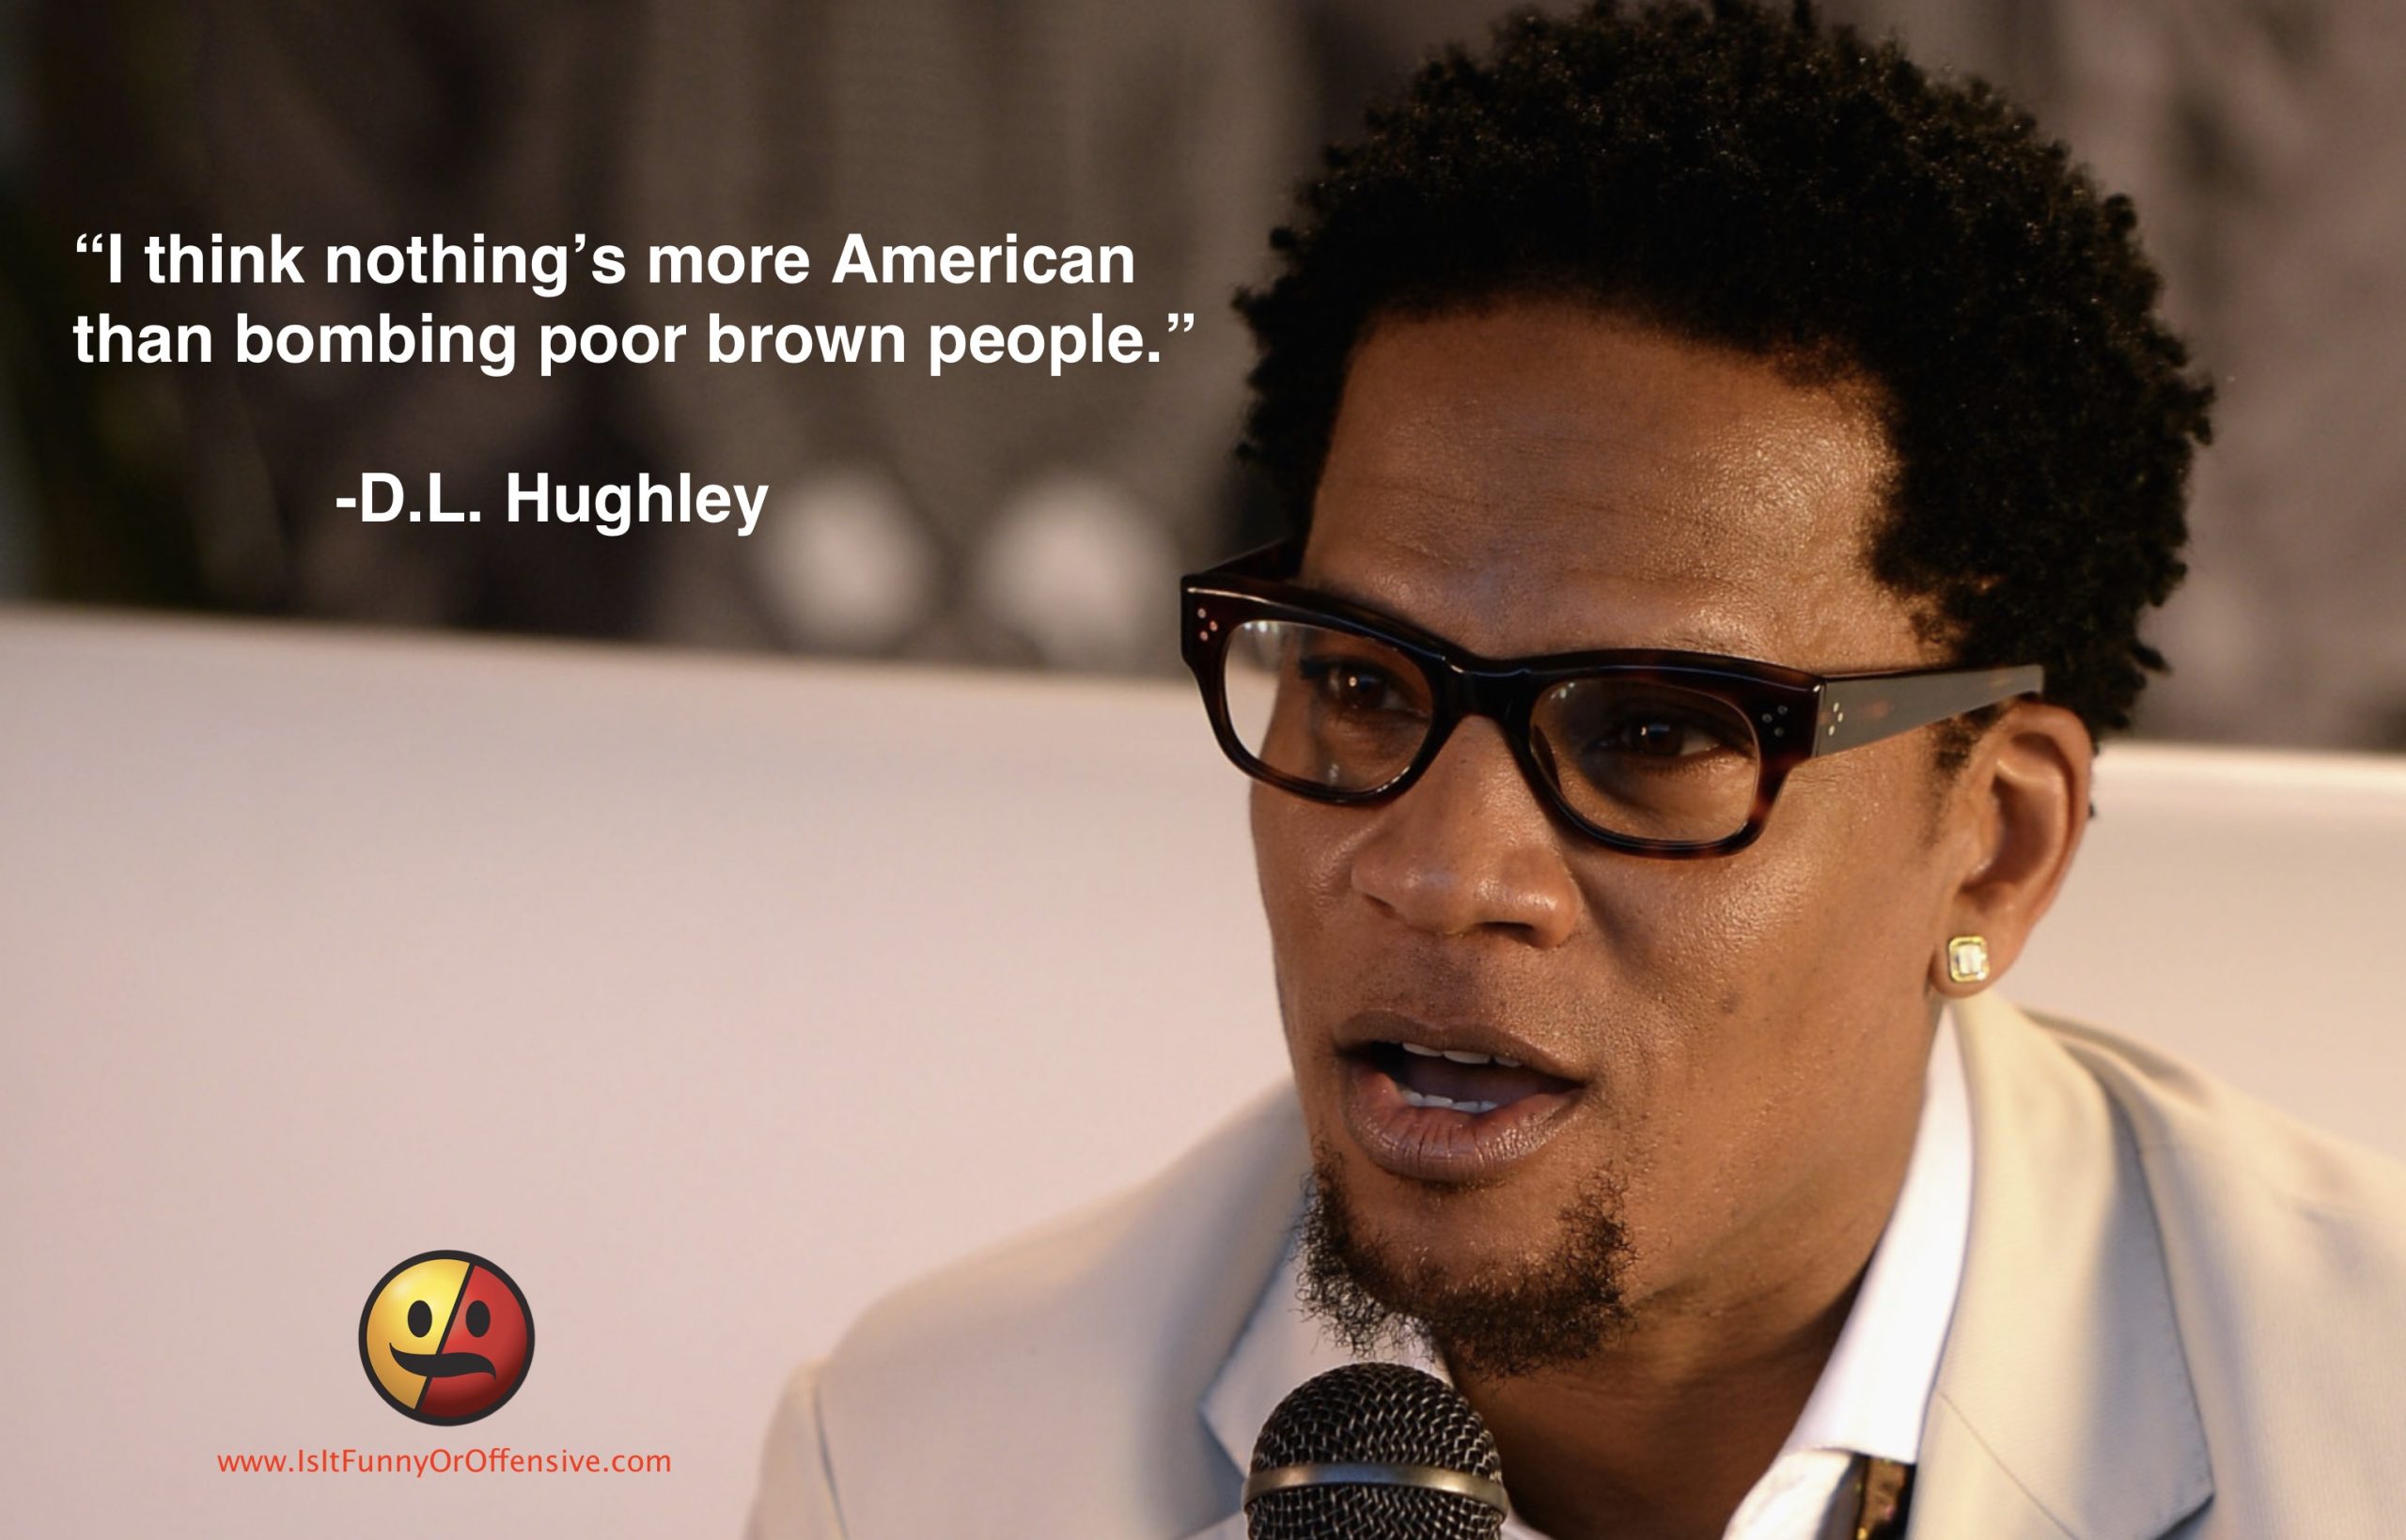 D.L. Hughley on Syria Bombings